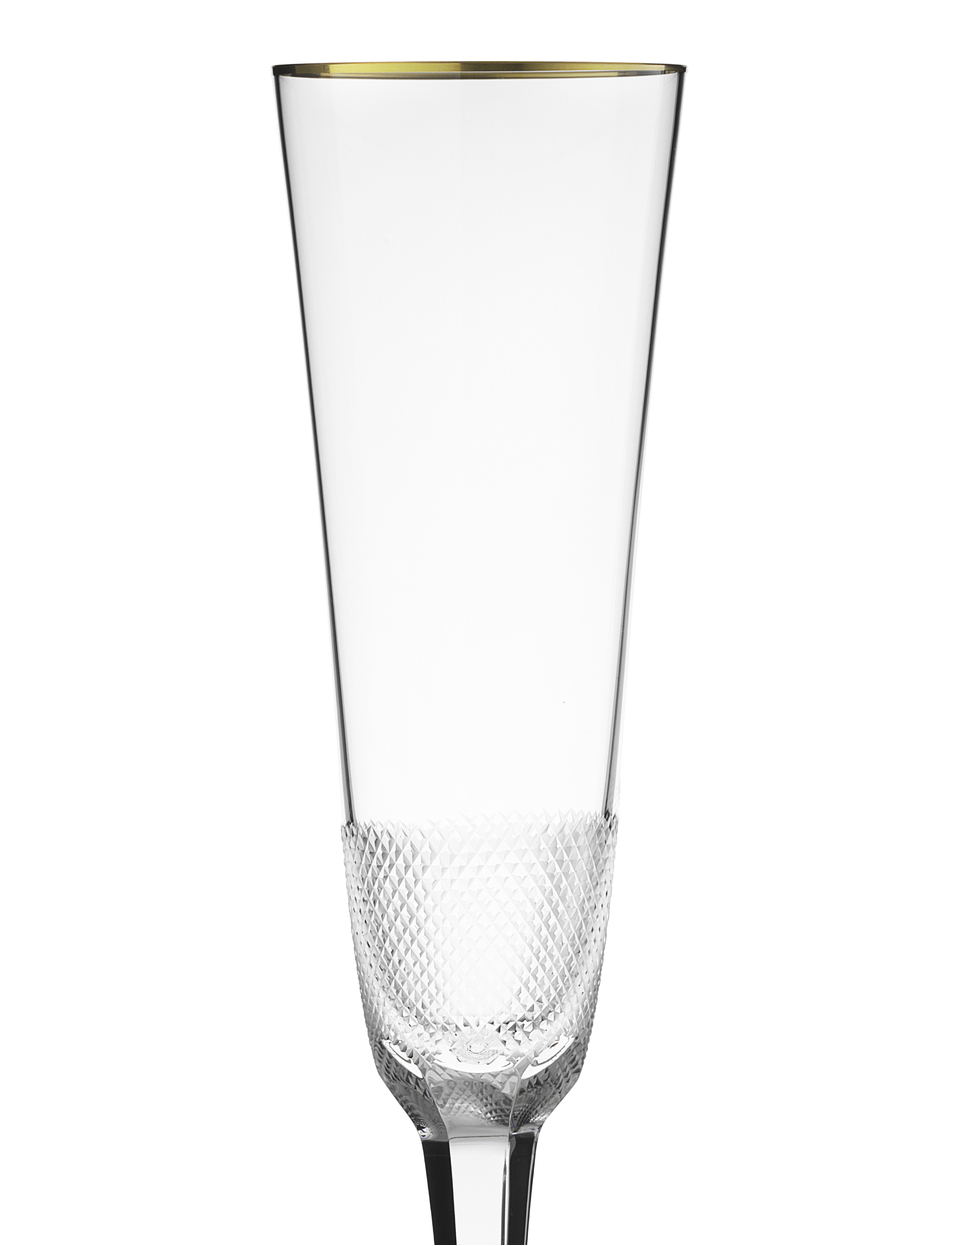 Royal champagne glass, 180 ml - gallery #3